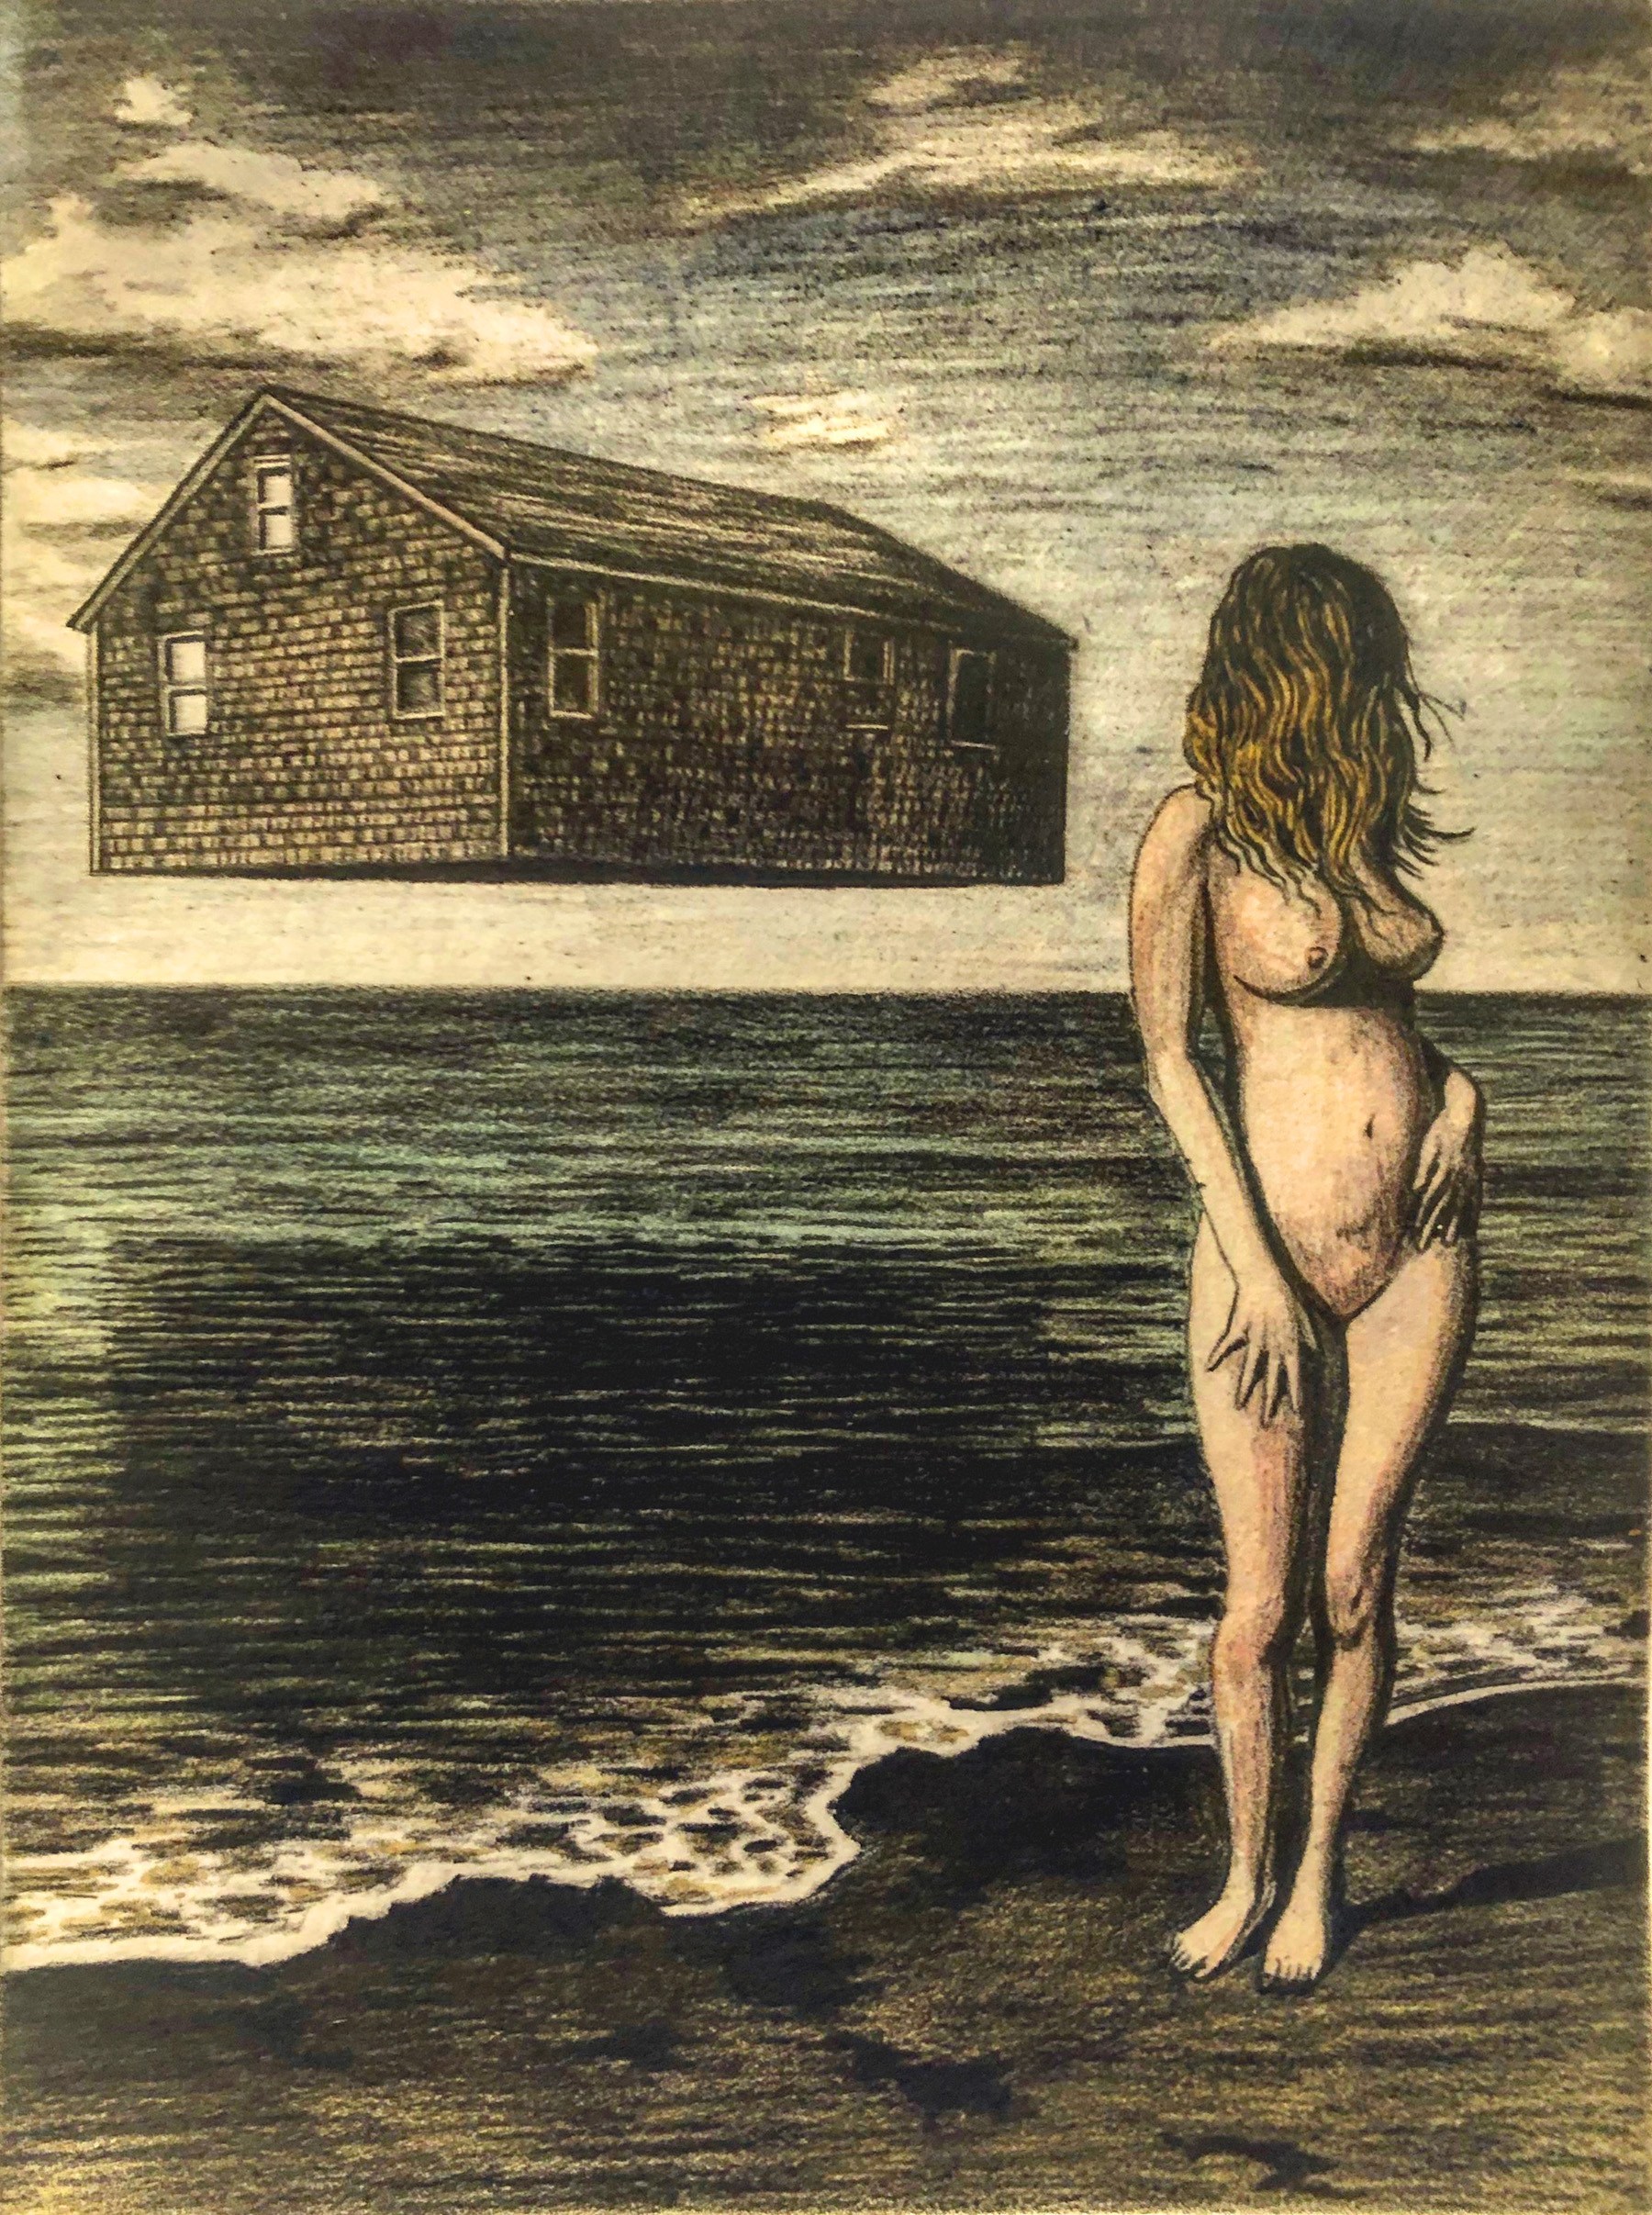    Siren    solarplate etching (black and white and with watercolor)  on Hahnemuhle paper  8” x 6” (10” x 14” sheet size)  edition of 10  2018  (available) 